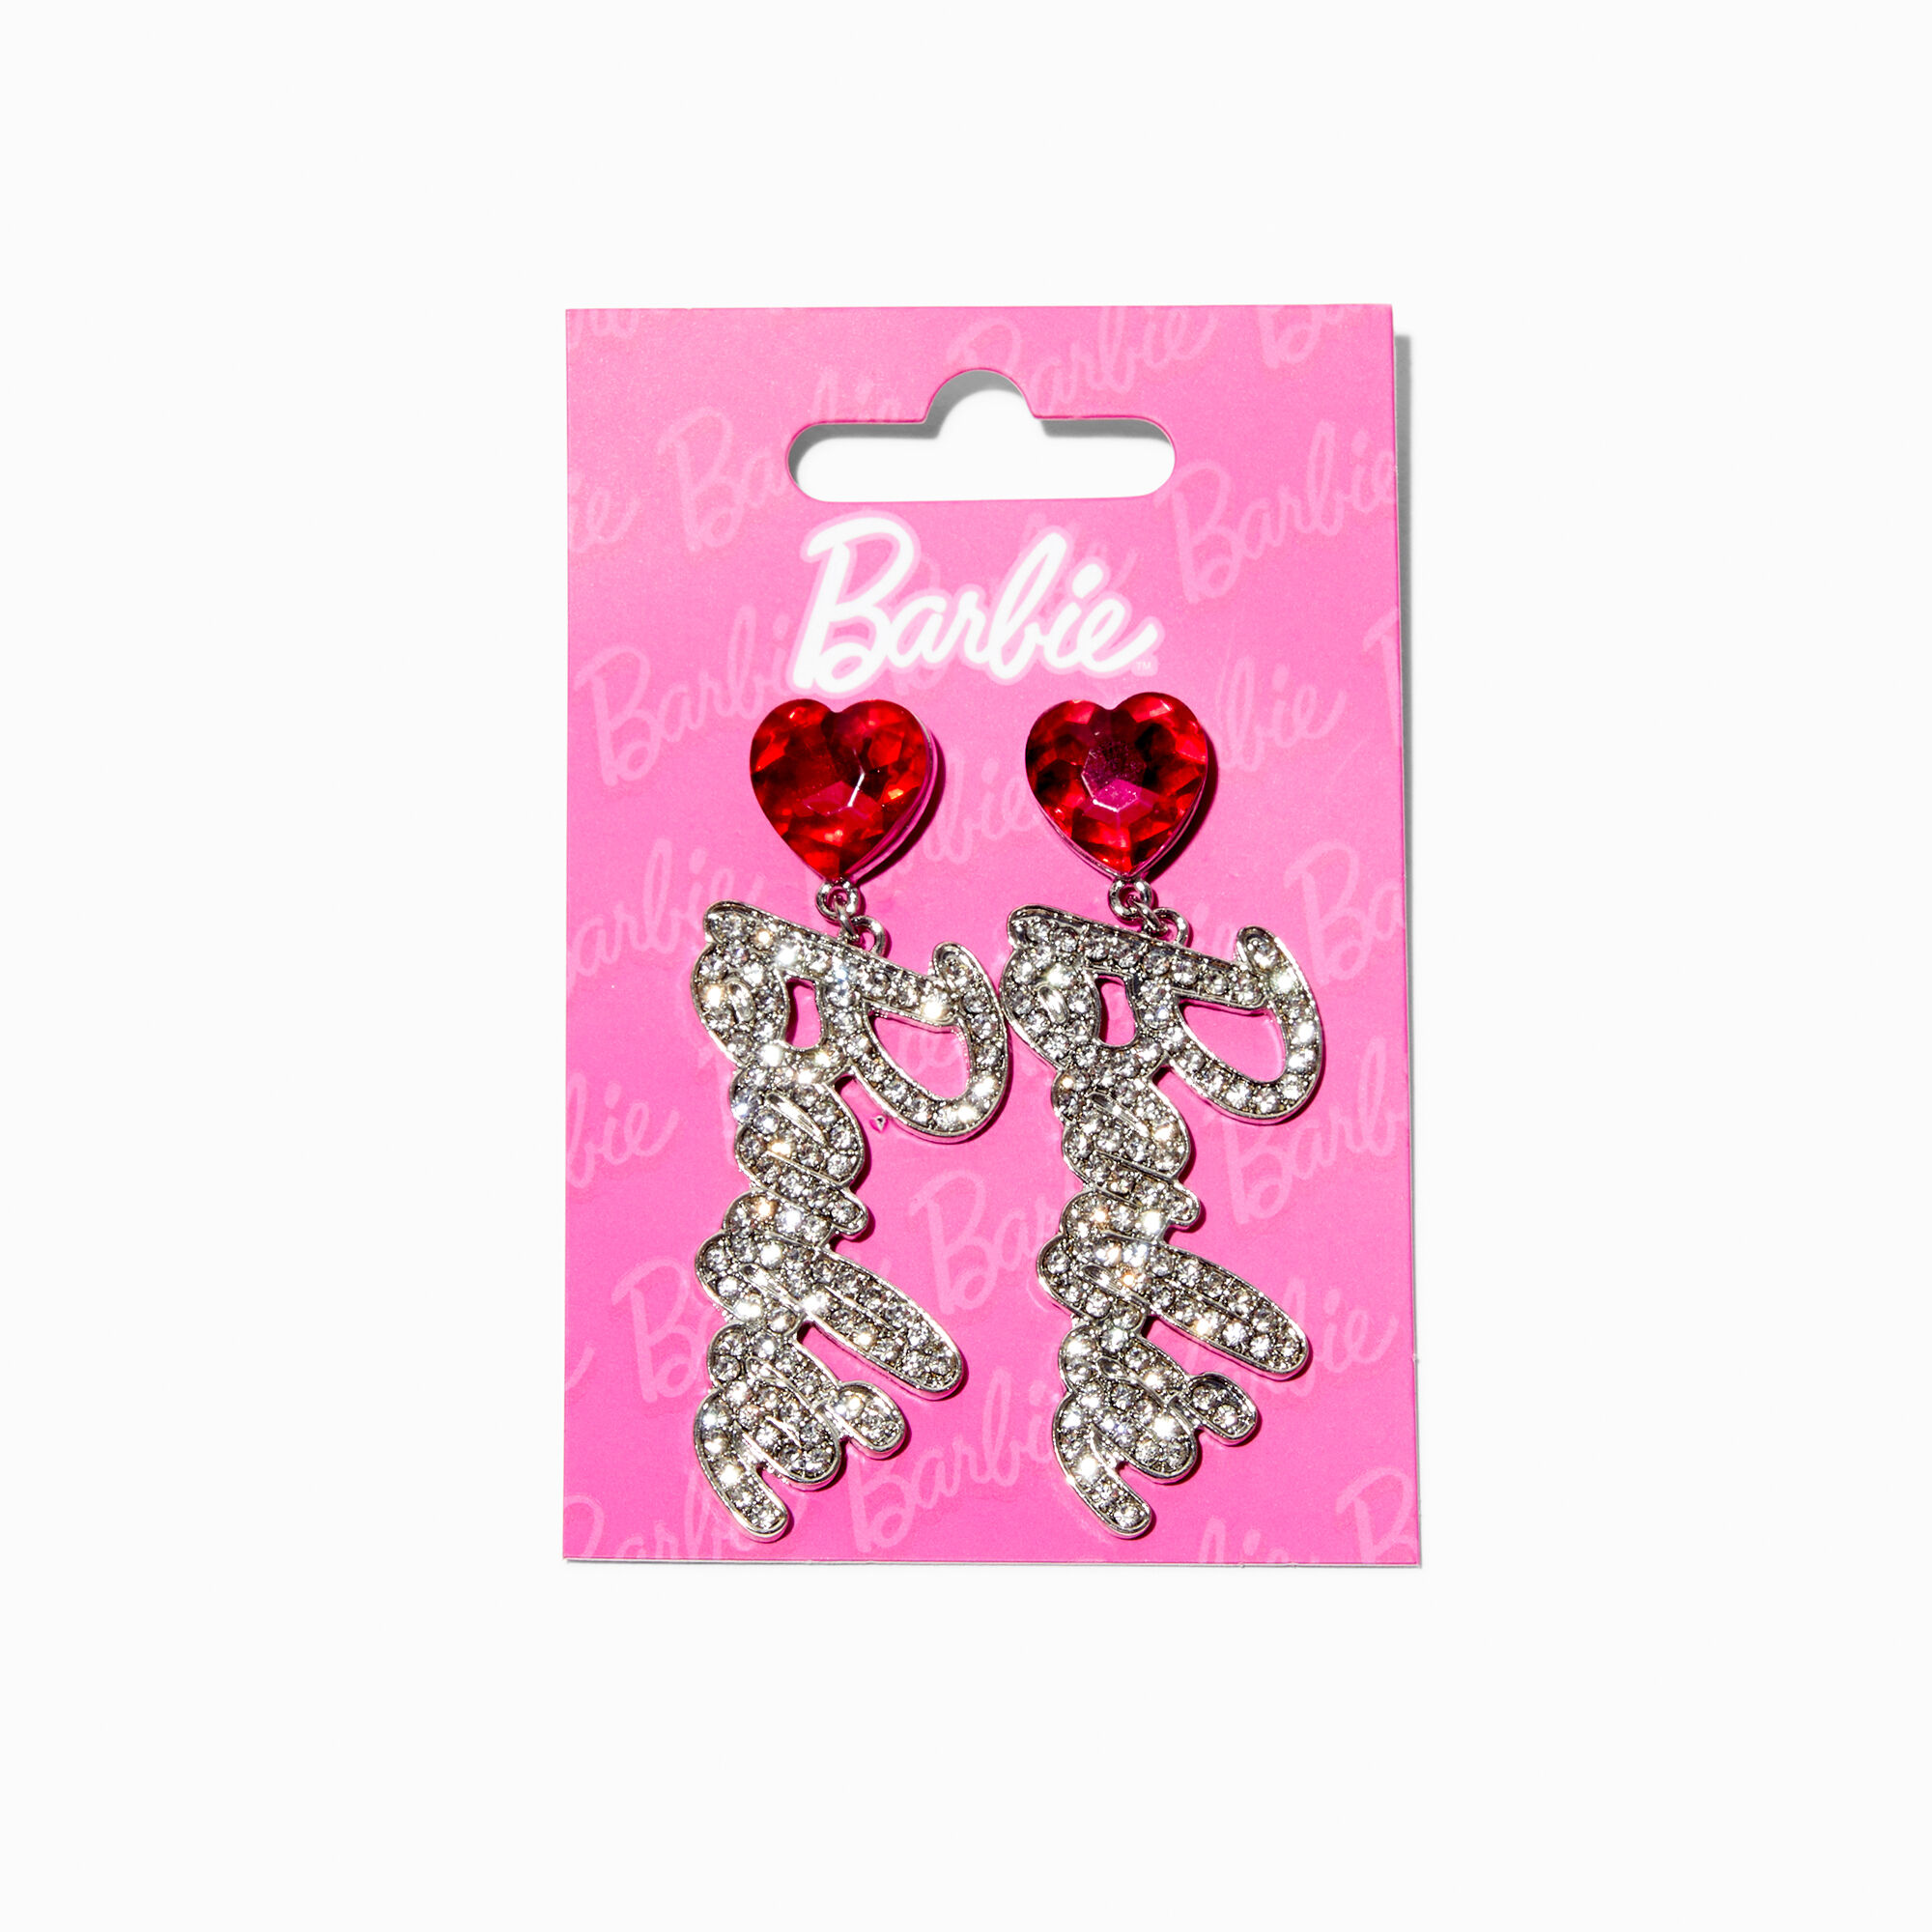 View Claires Barbie Heart Drop Earrings Red information